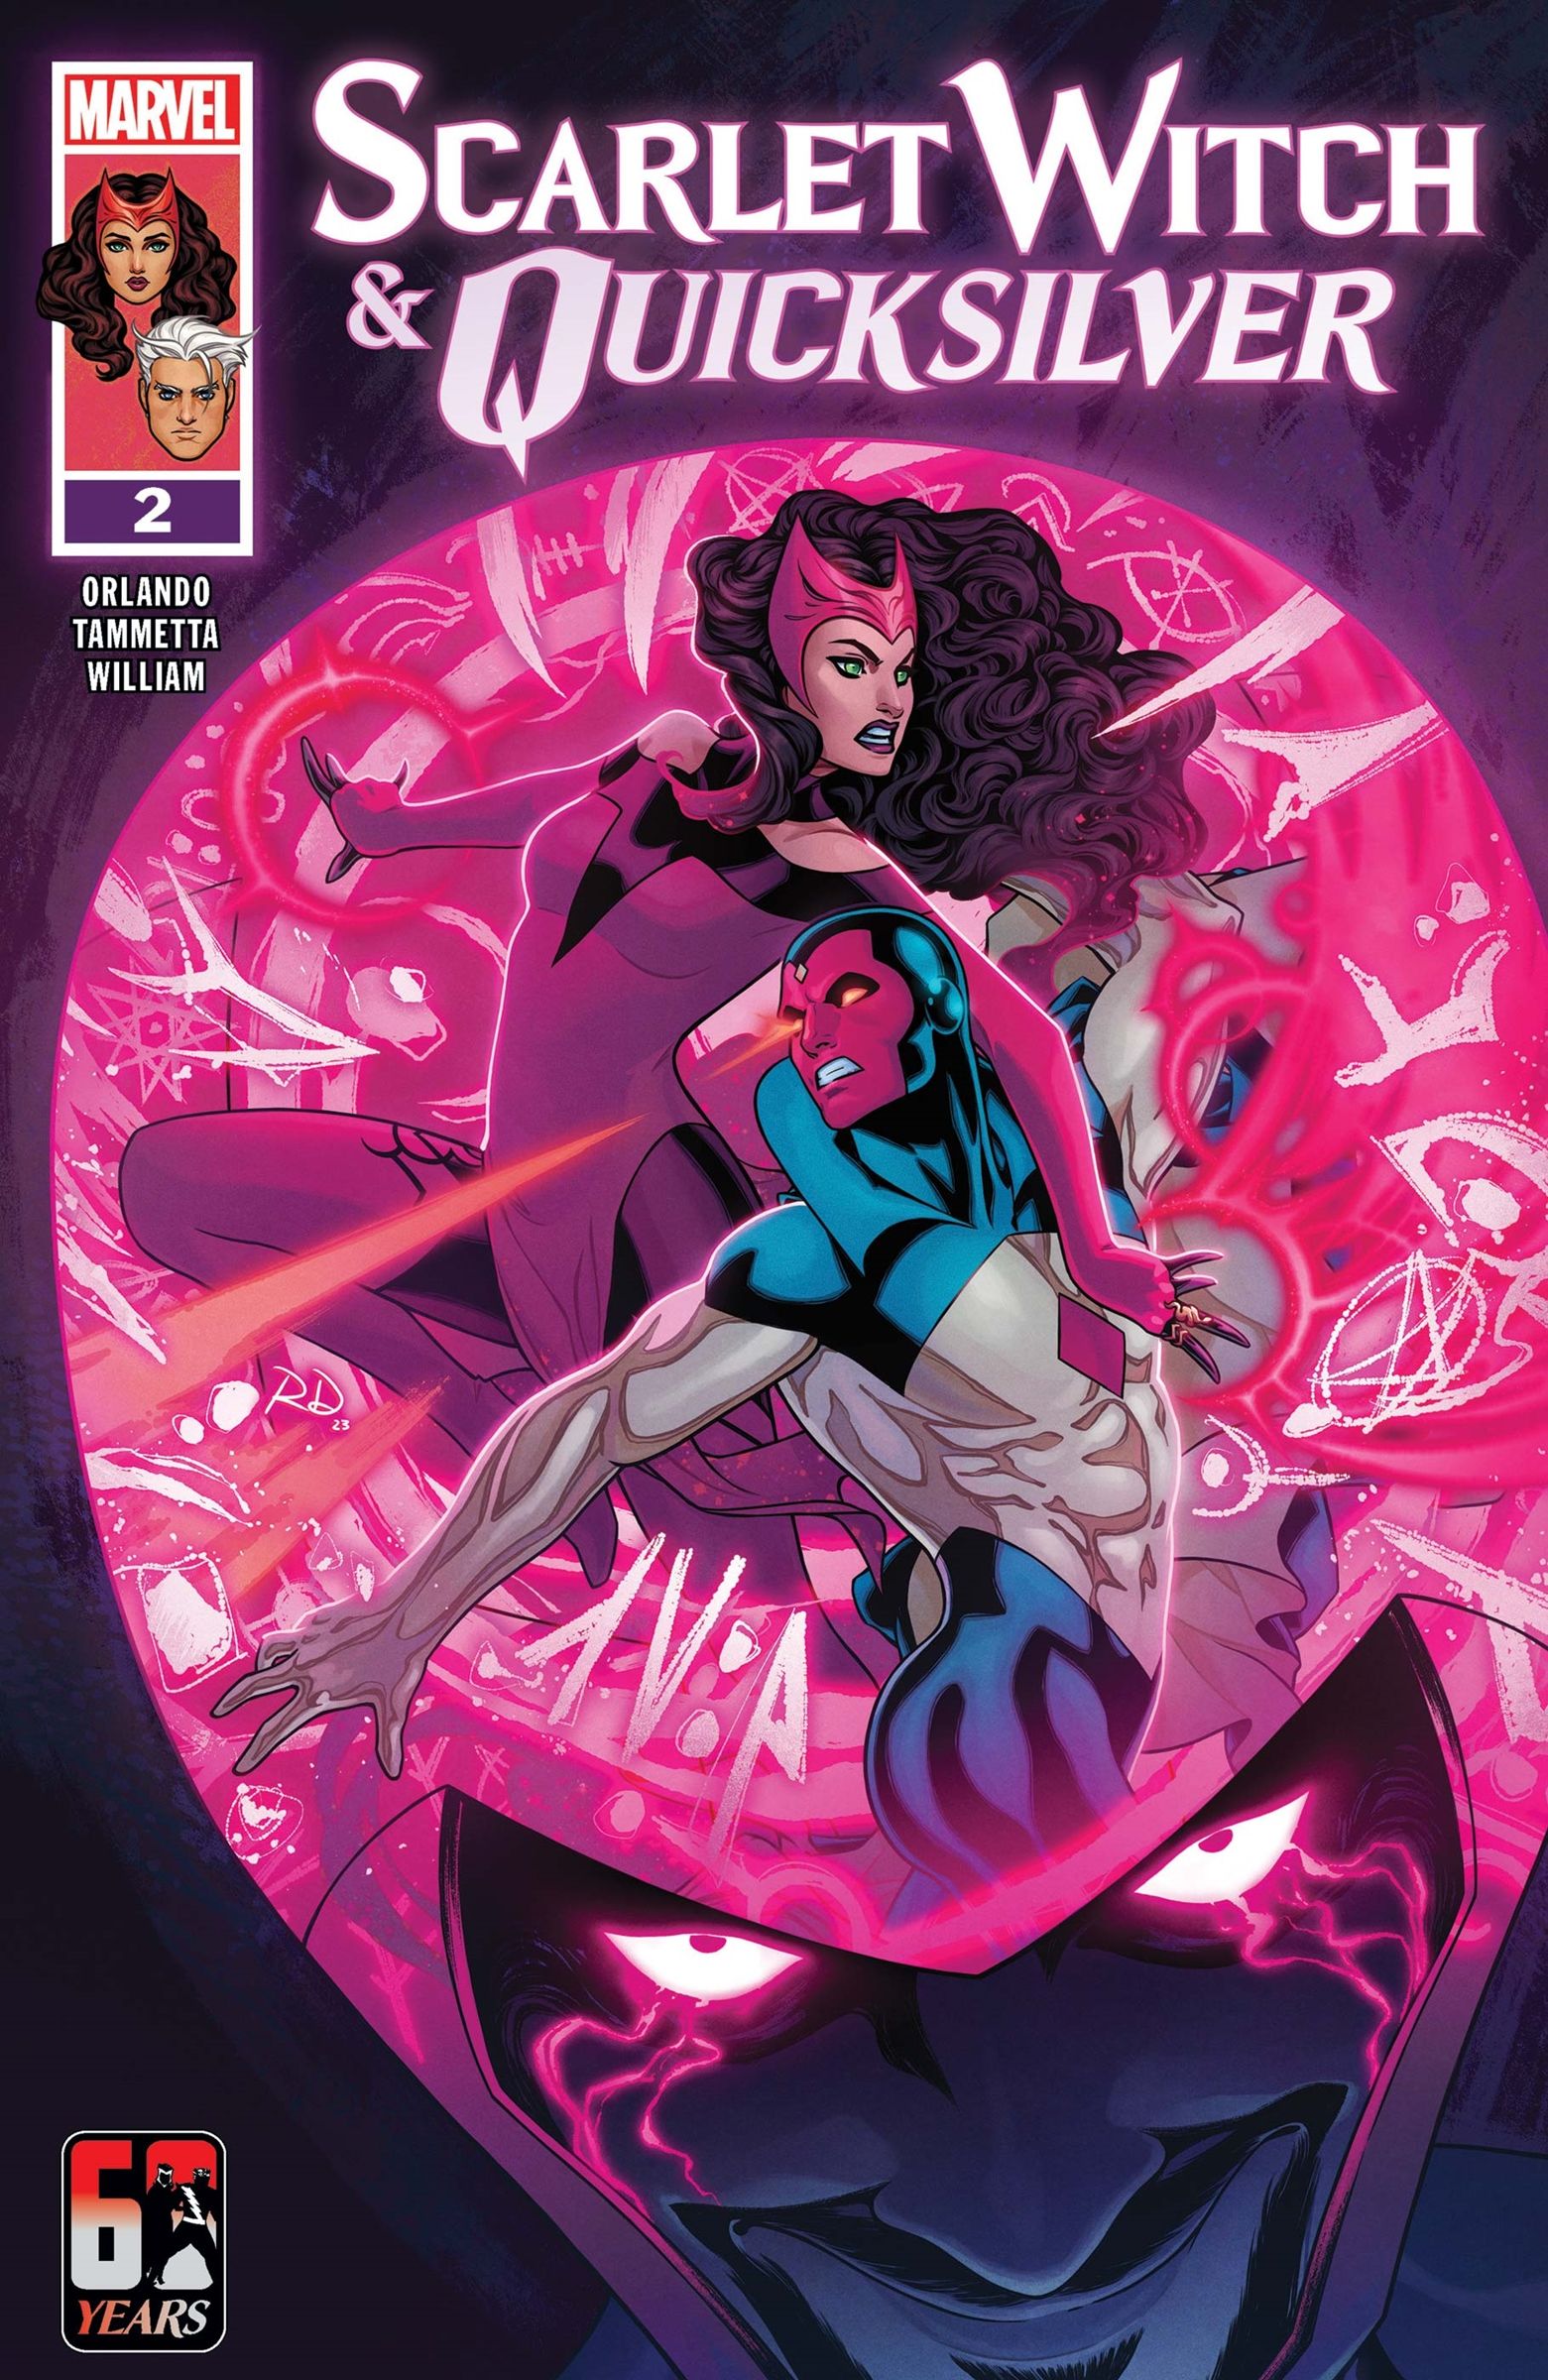 The Vision and Scarlet Witch are pictured imposed onto the Wizard's glowing pink helmet. 